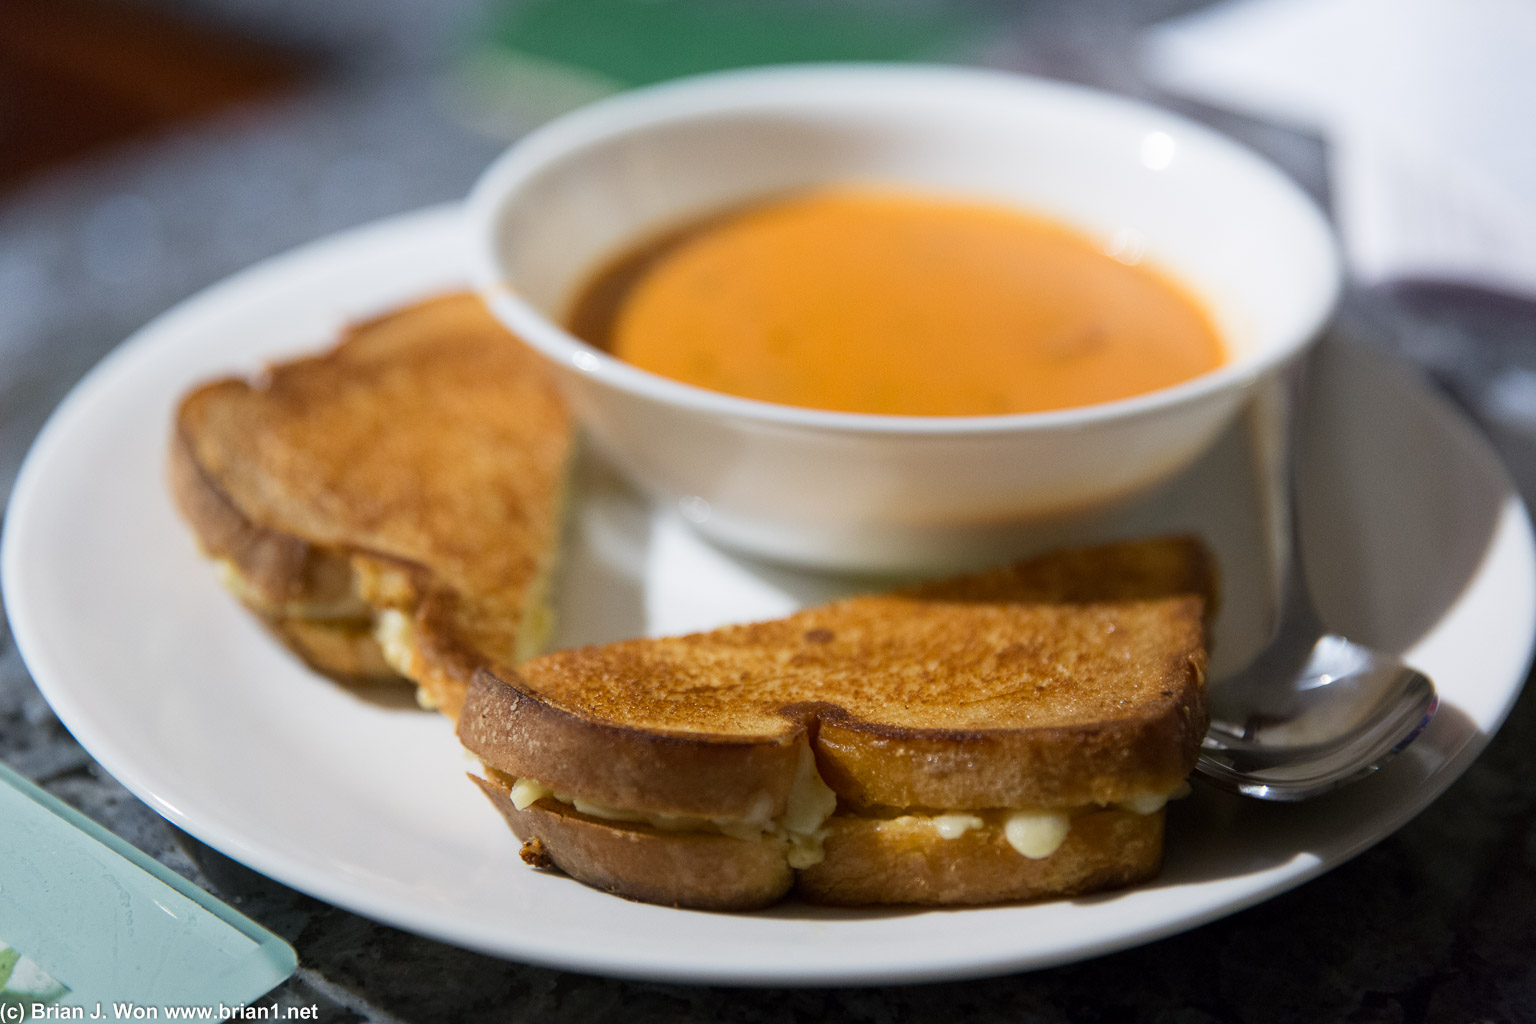 Homemade grilled cheese plus tomato soup. Fancy!